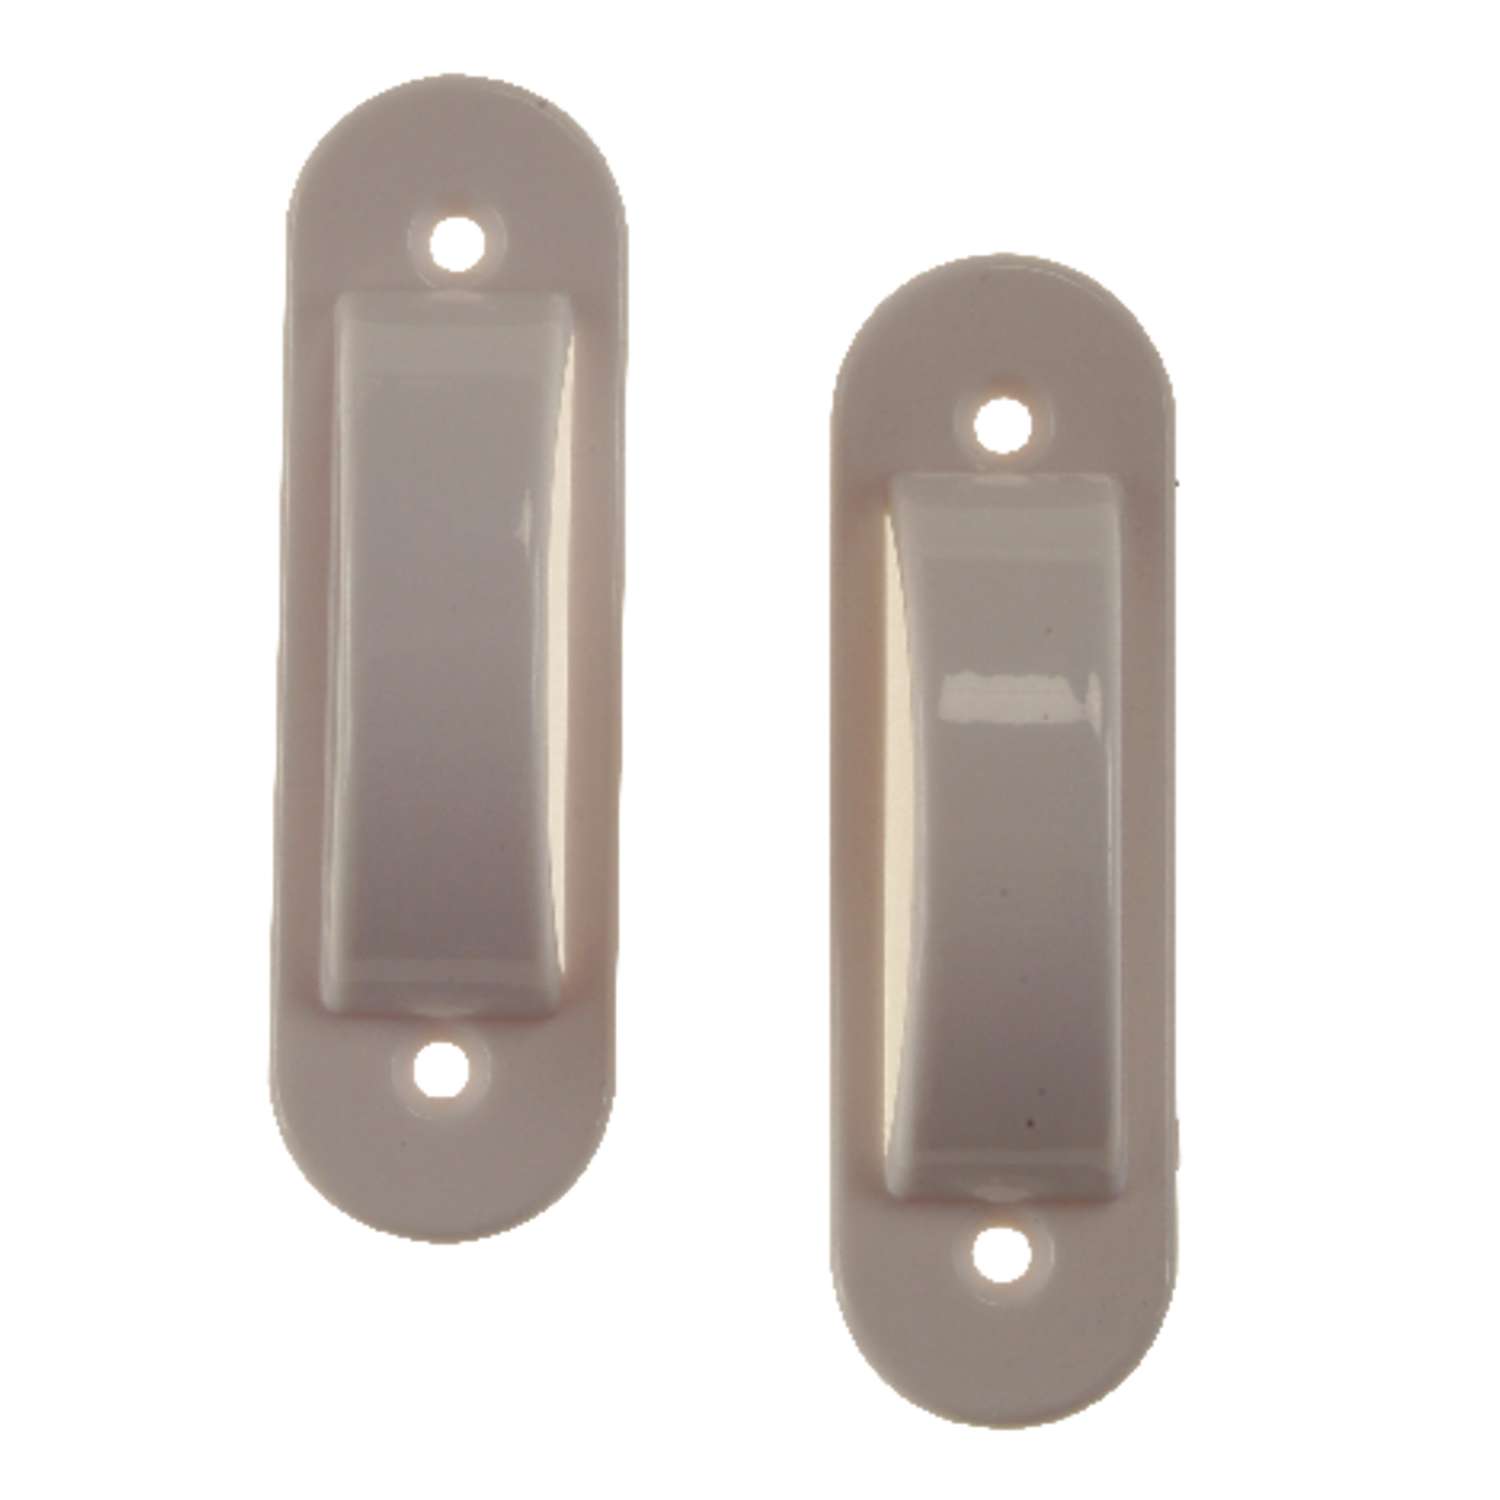 CLIP ON PLASTIC CORNER GUIDES PROTECTORS FOR WIRE GLASS-WASHER RACKS RUNNERS 